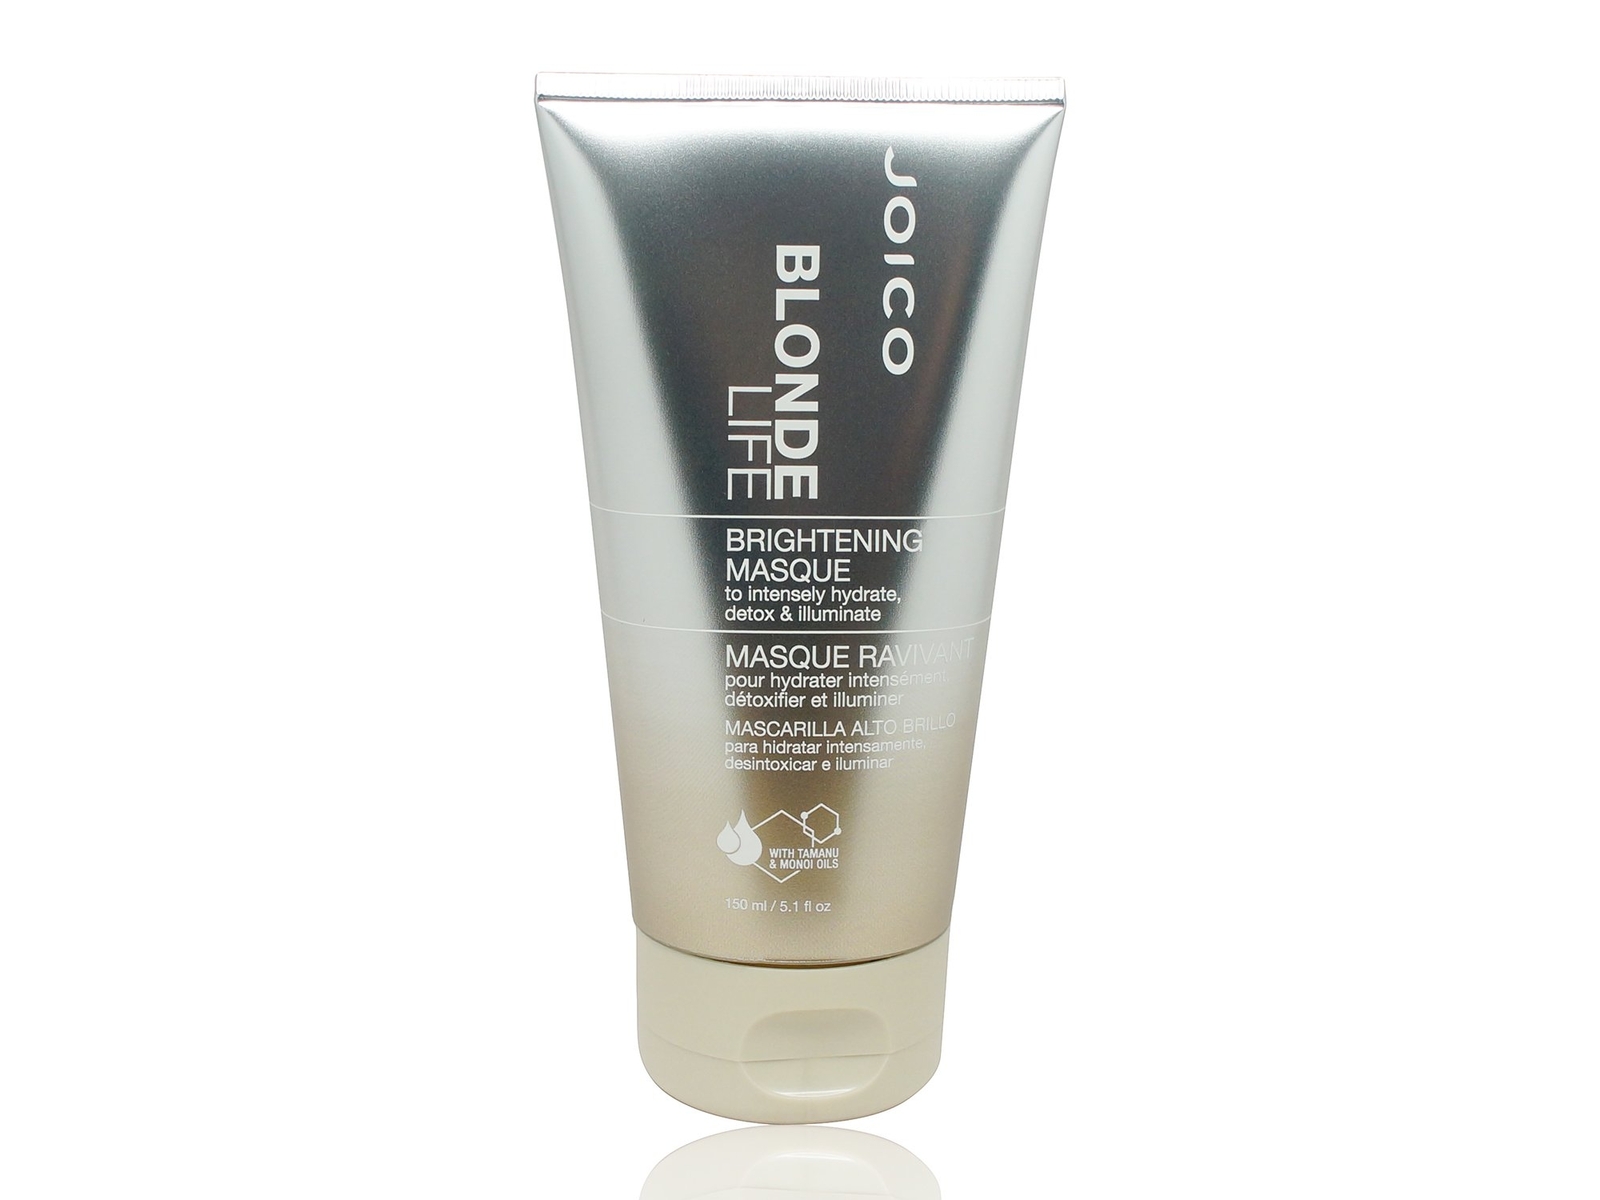 5. "Blonde Life Brightening Masque" by Joico - wide 5